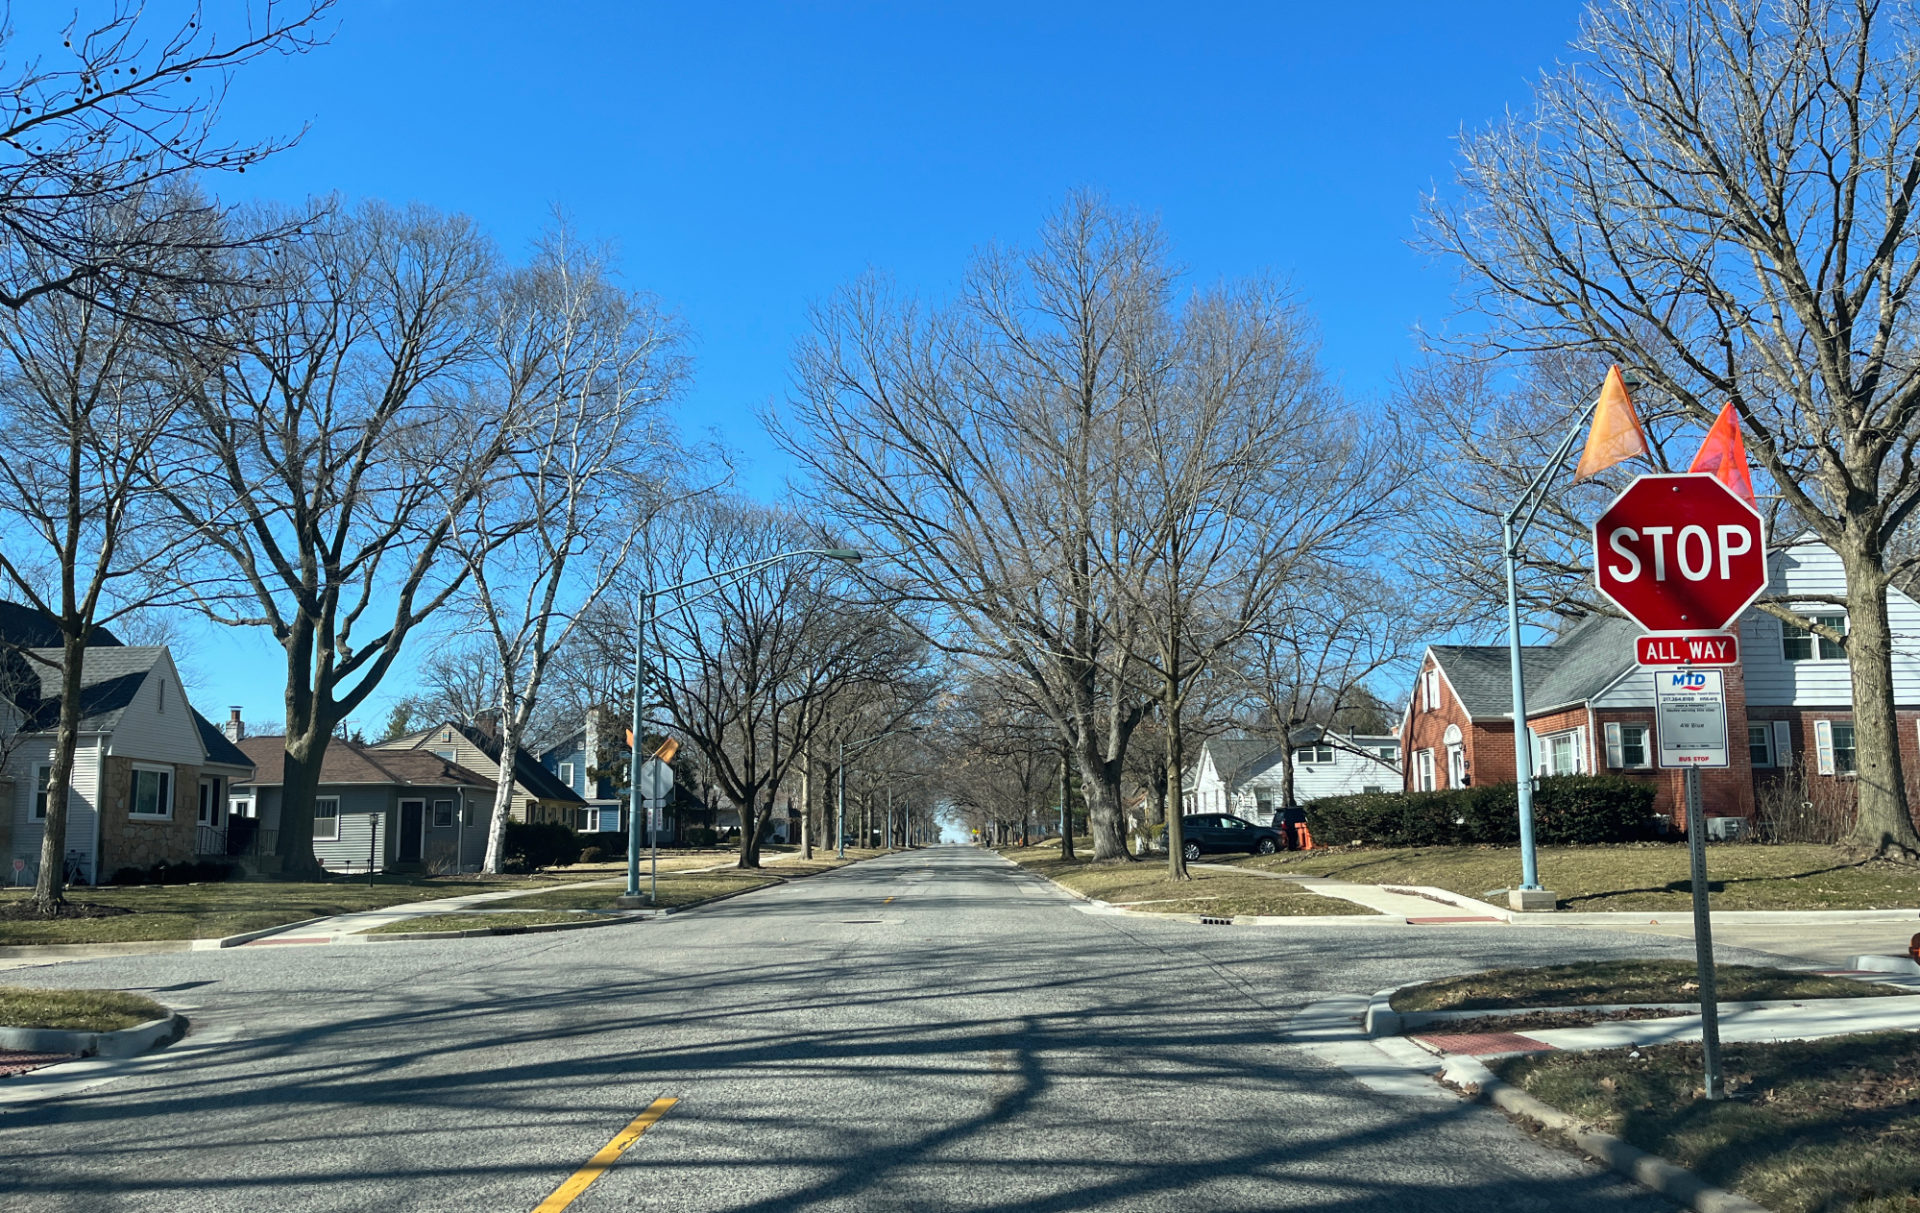 Intersection of John and McKinley in Champaign, looking west on John Street. There is a stop sign on the right, with orange flags atop the sign. The intersection is empty, the trees are bare, and the sky is very blue.